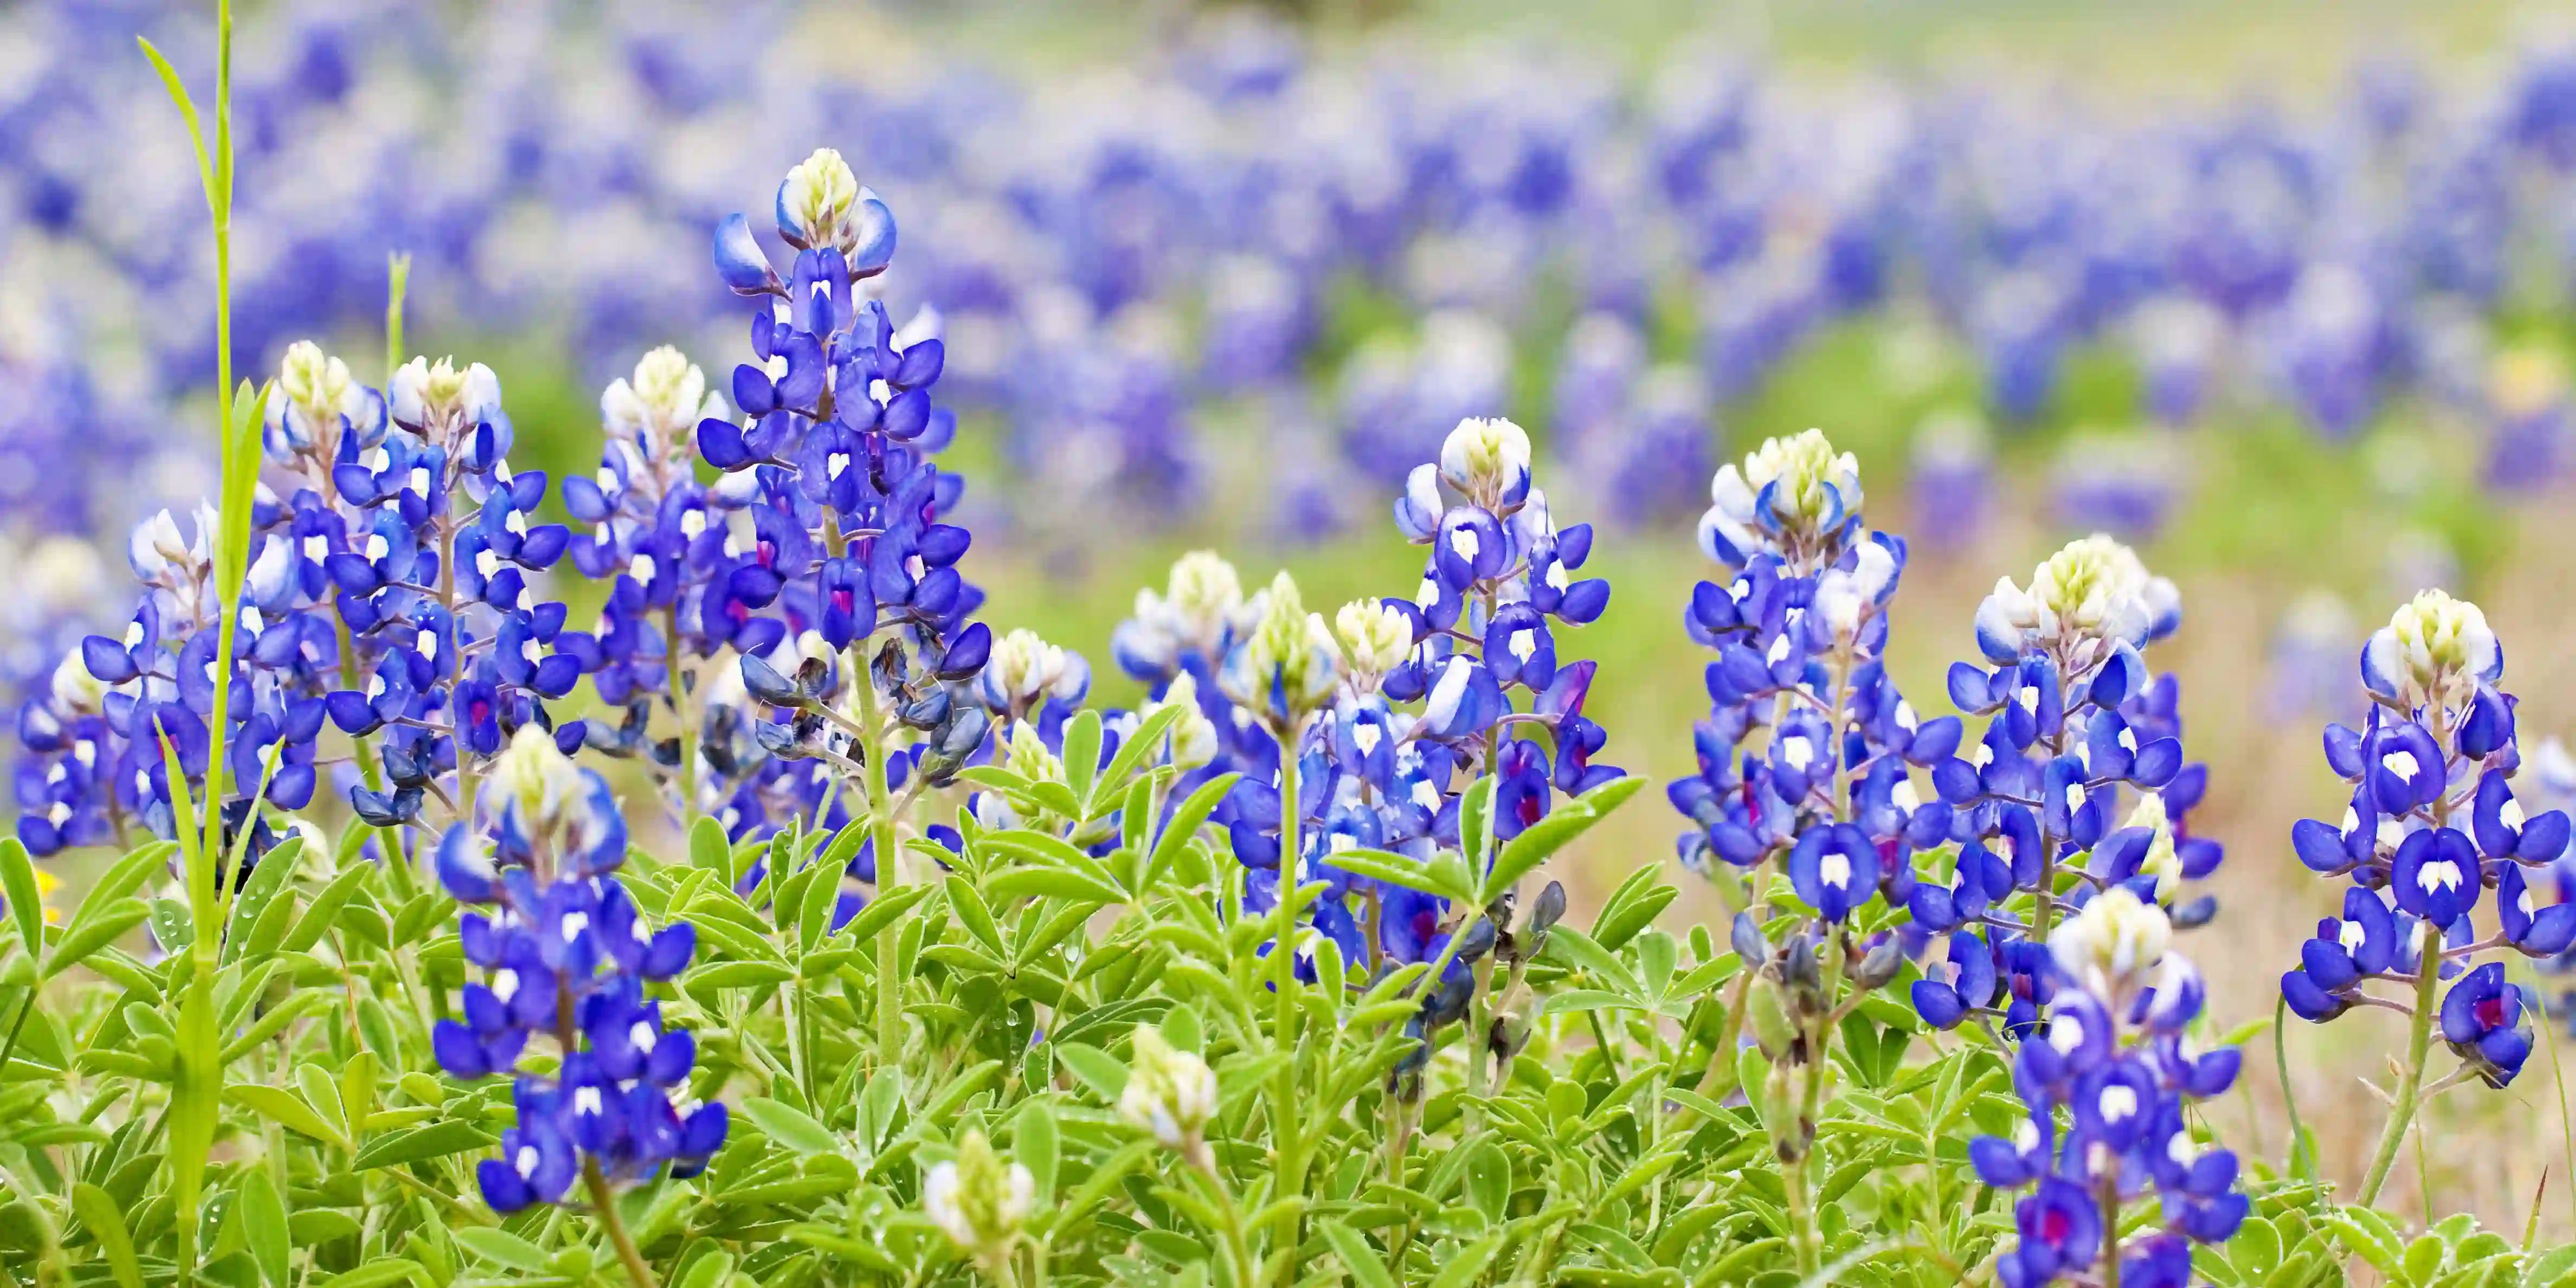 A field of Bluebonnet wildflowers in Texas Hill Country during the Austin event, the Bluebonnet Festival.